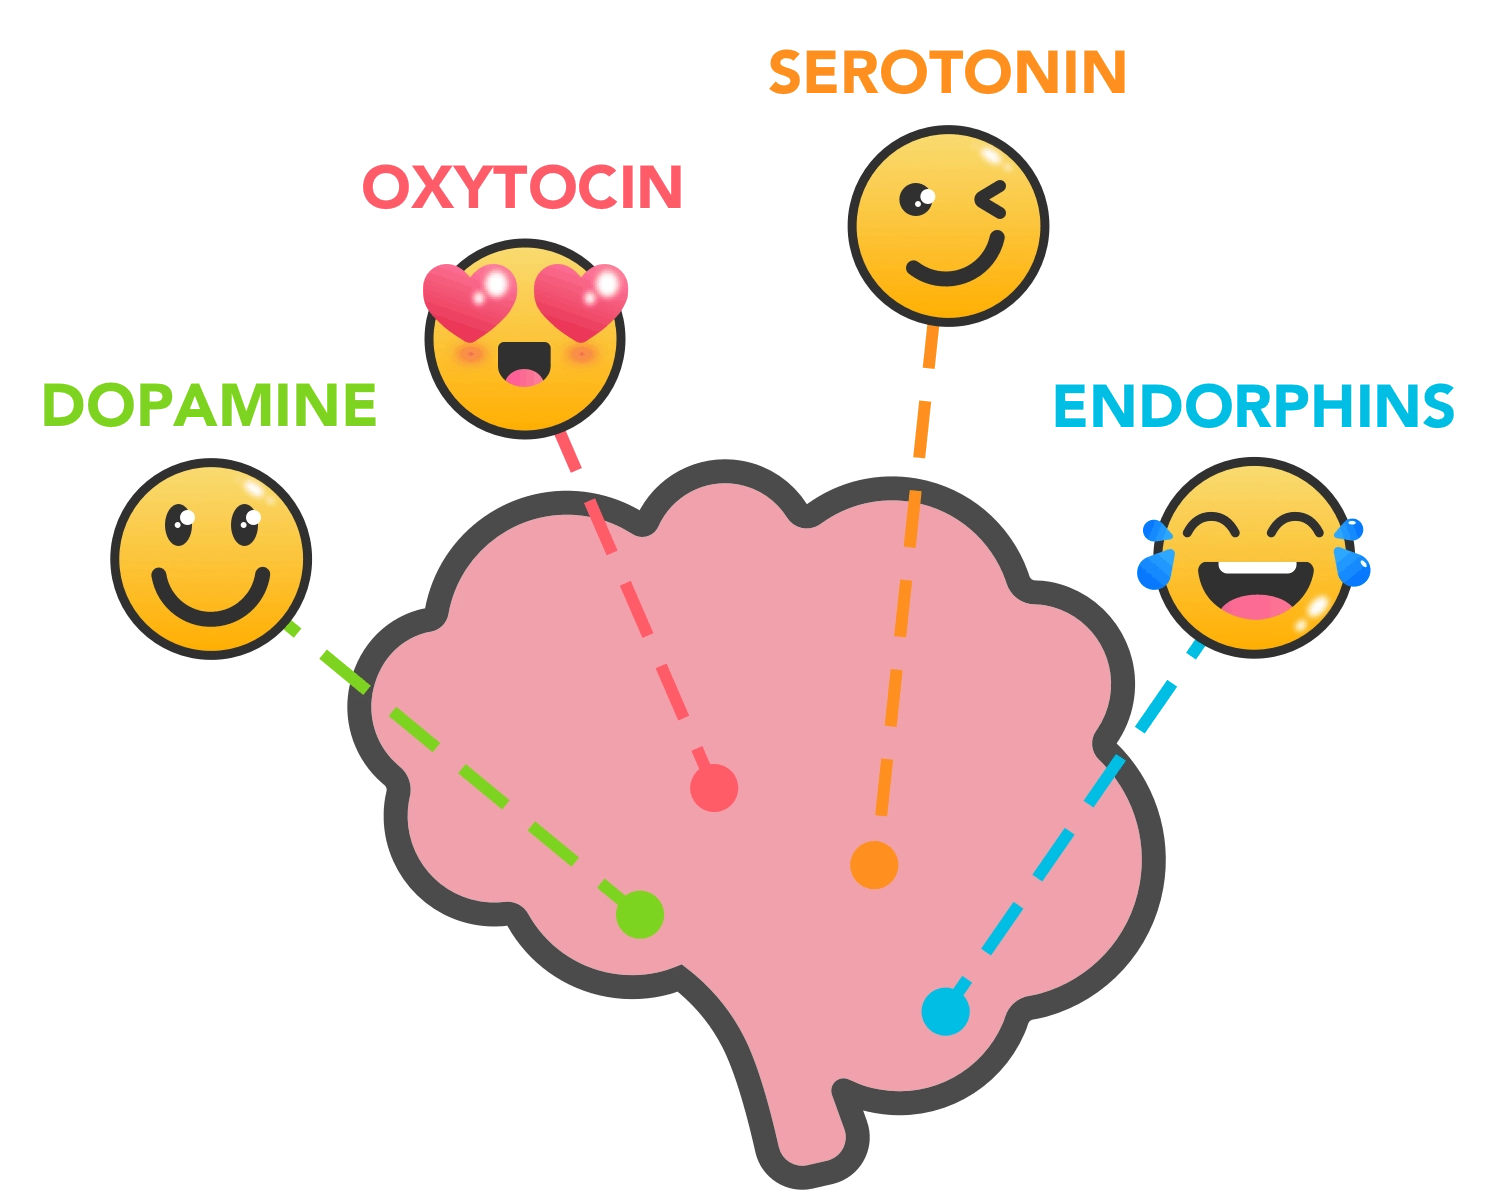 How do endorphins, dopamine, and serotonin affect our mood?